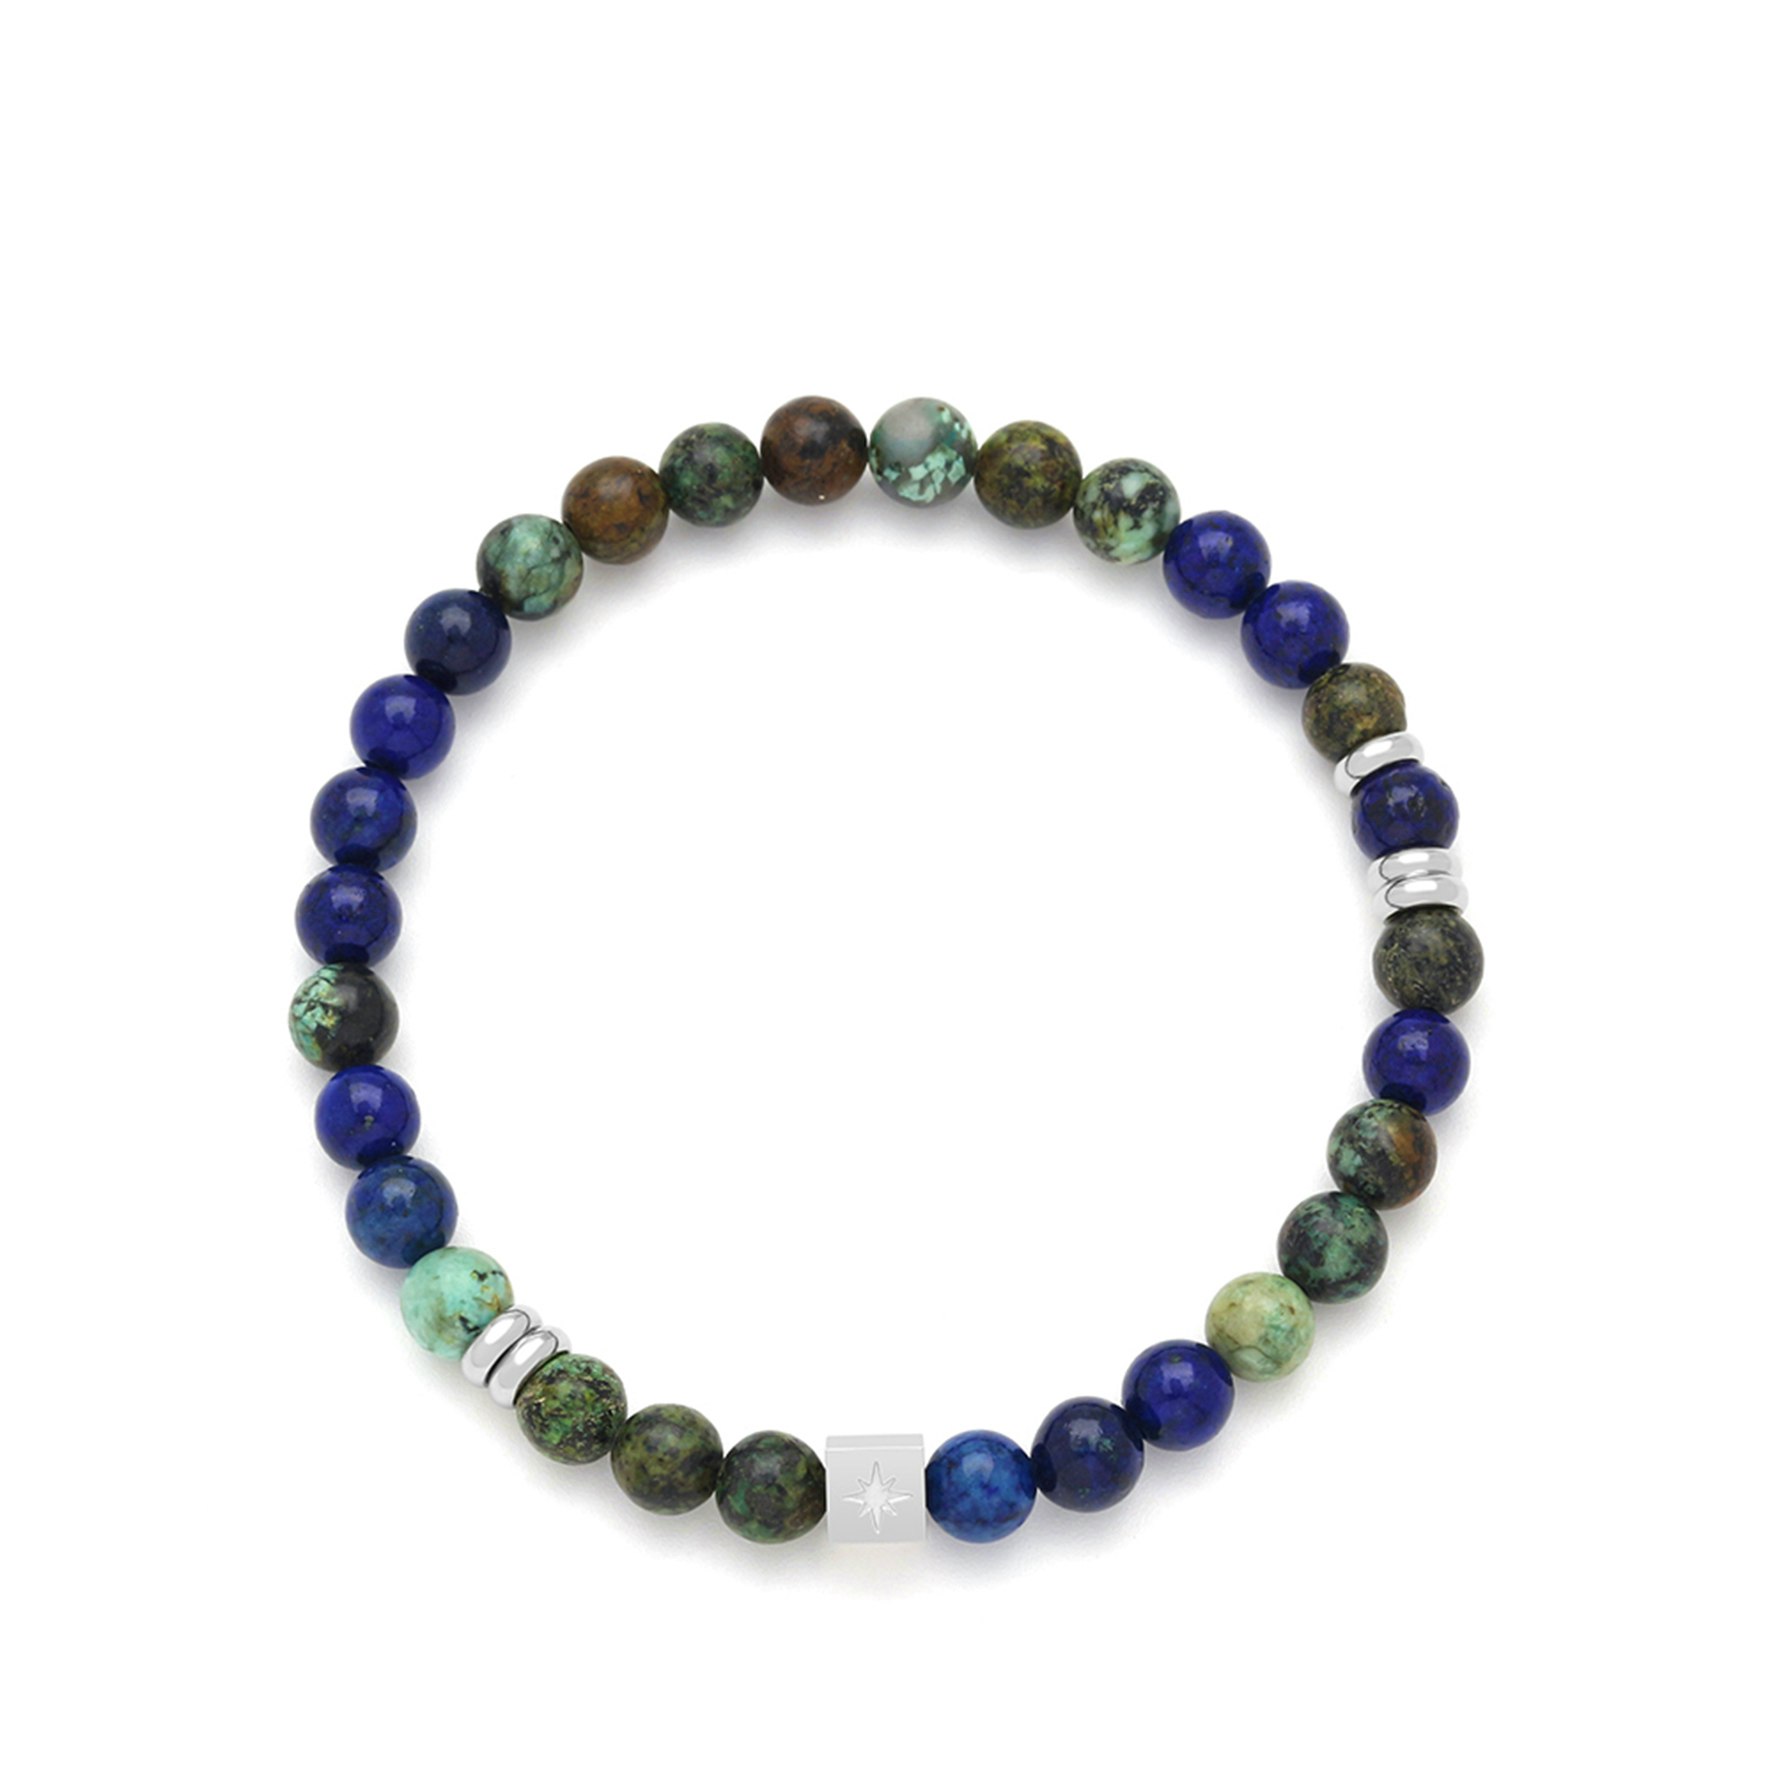 Loui Green and Blue Bracelet from SAMIE in Stainless steel